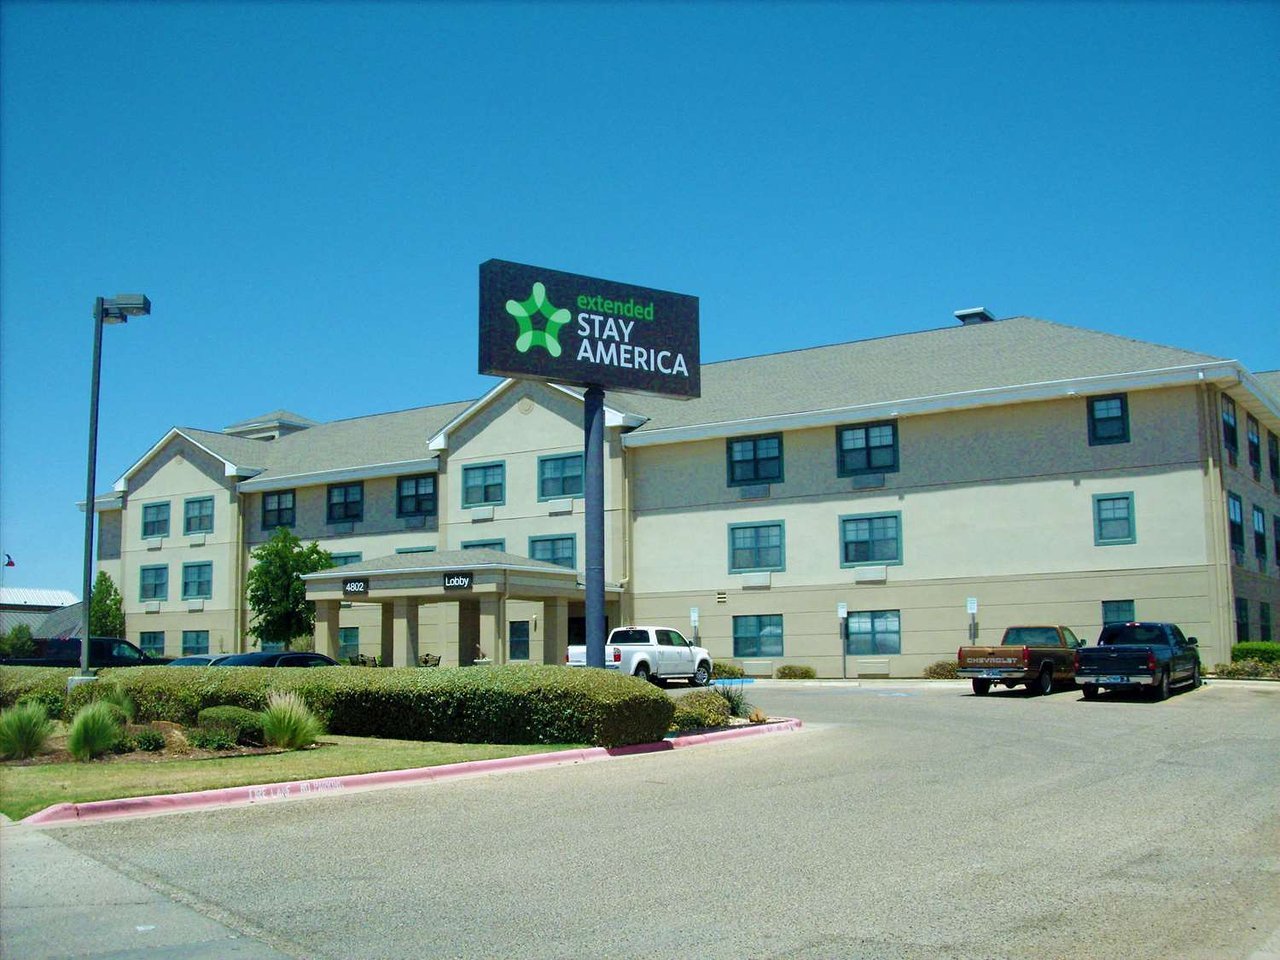 Photo of Extended Stay America - Lubbock Southwest, Lubbock, TX